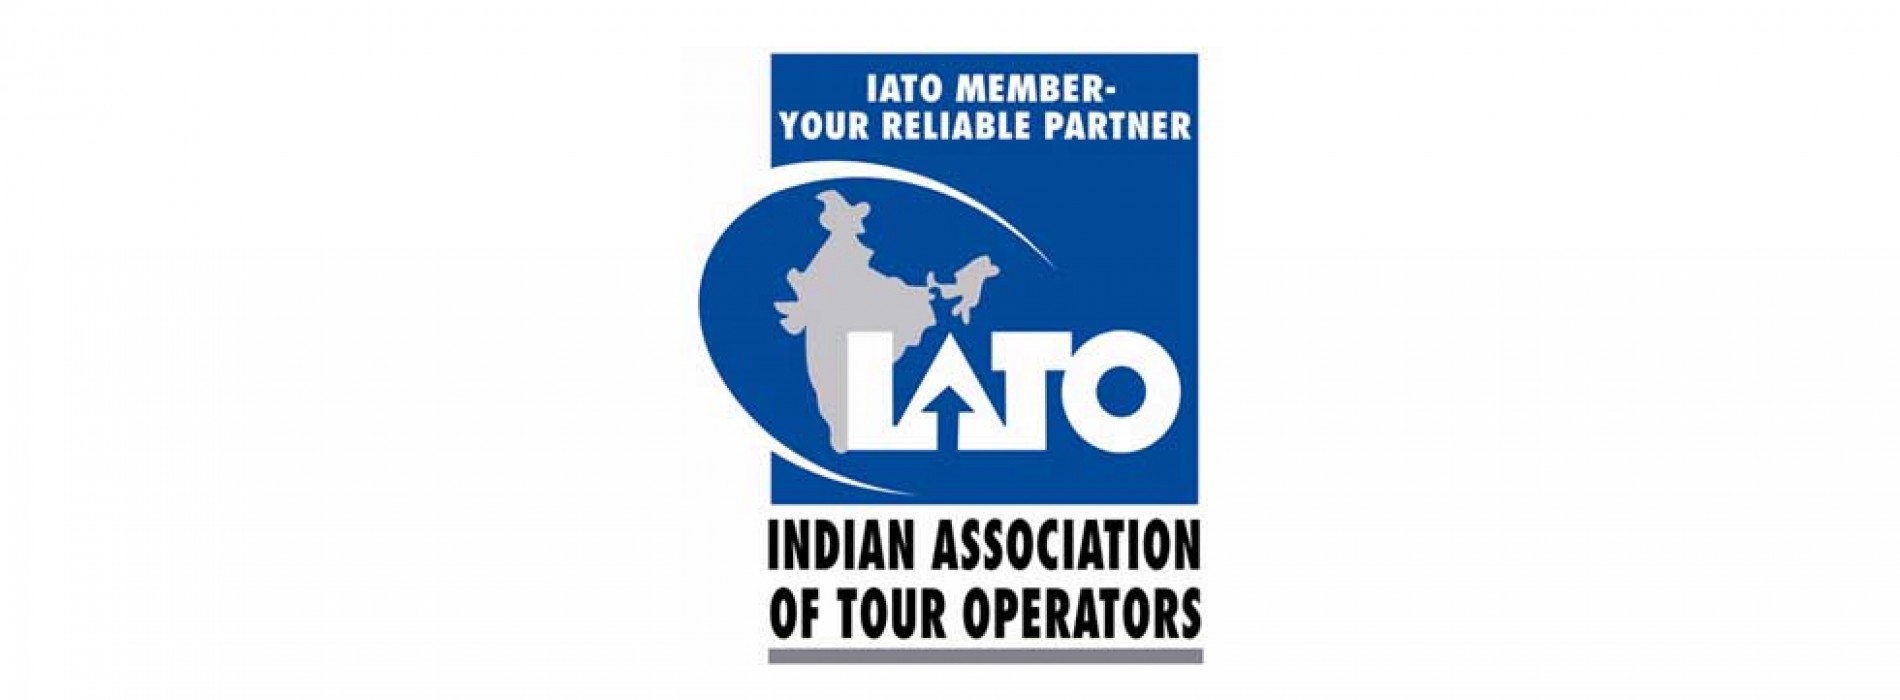 32nd IATO Annual Convention to take place in Chennai from 18-21 September, 2016